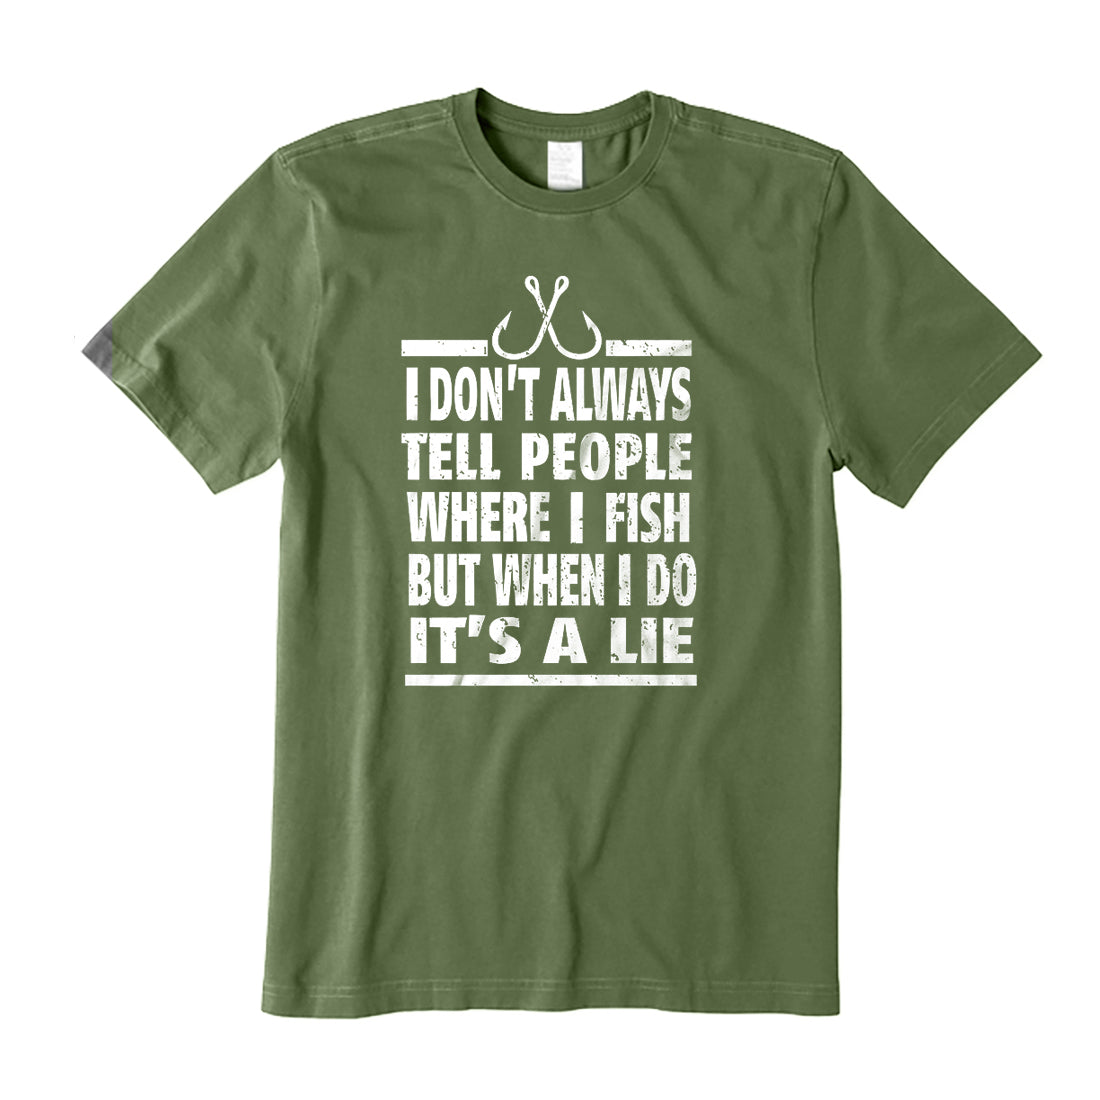 NOT TELL PEOPLE WHERE I FISH T-Shirt